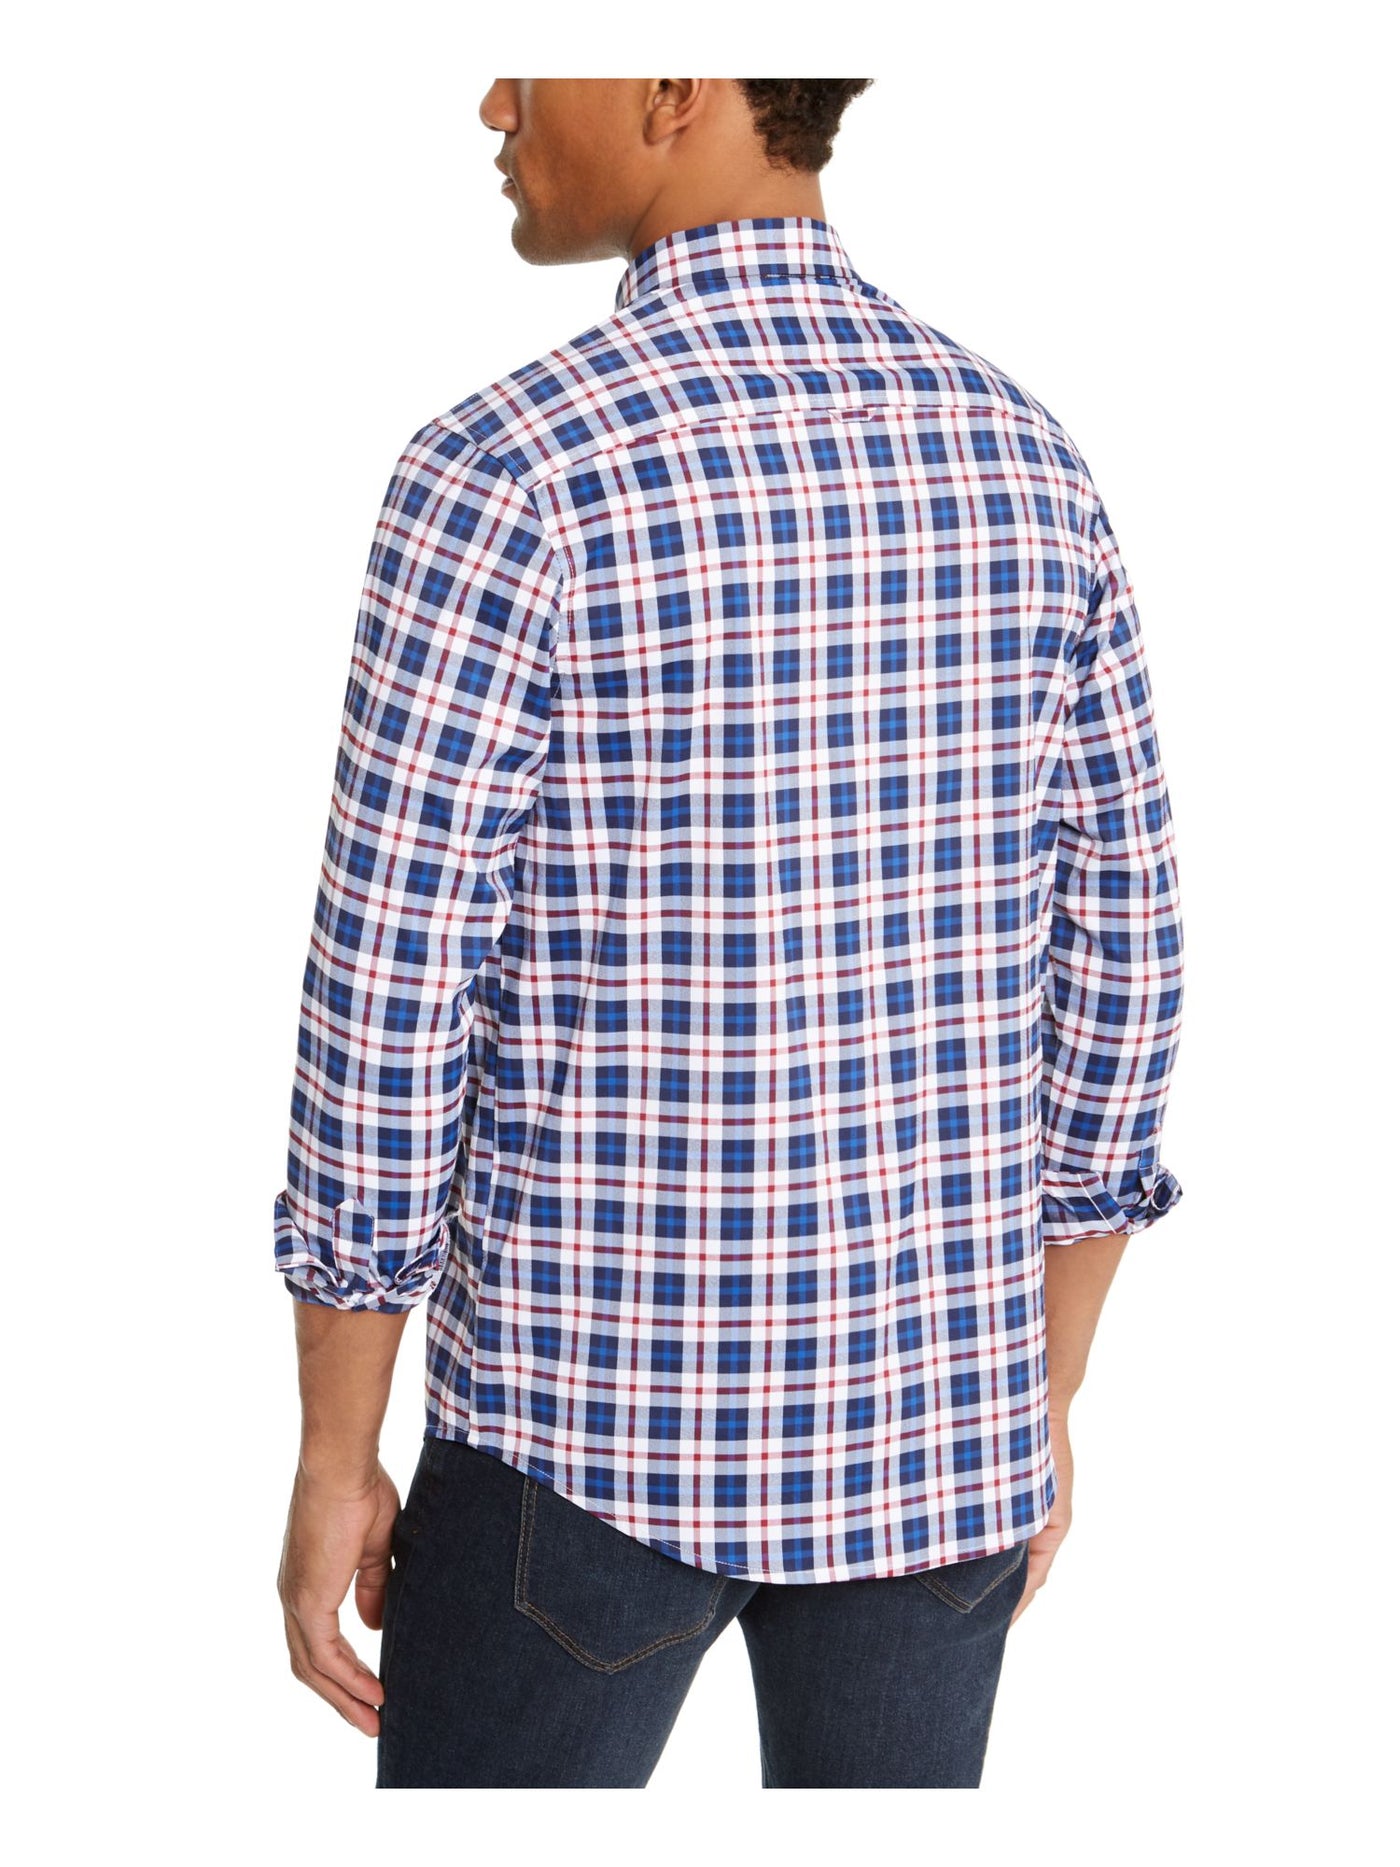 CLUBROOM Mens Navy Plaid Collared Button Down Shirt S